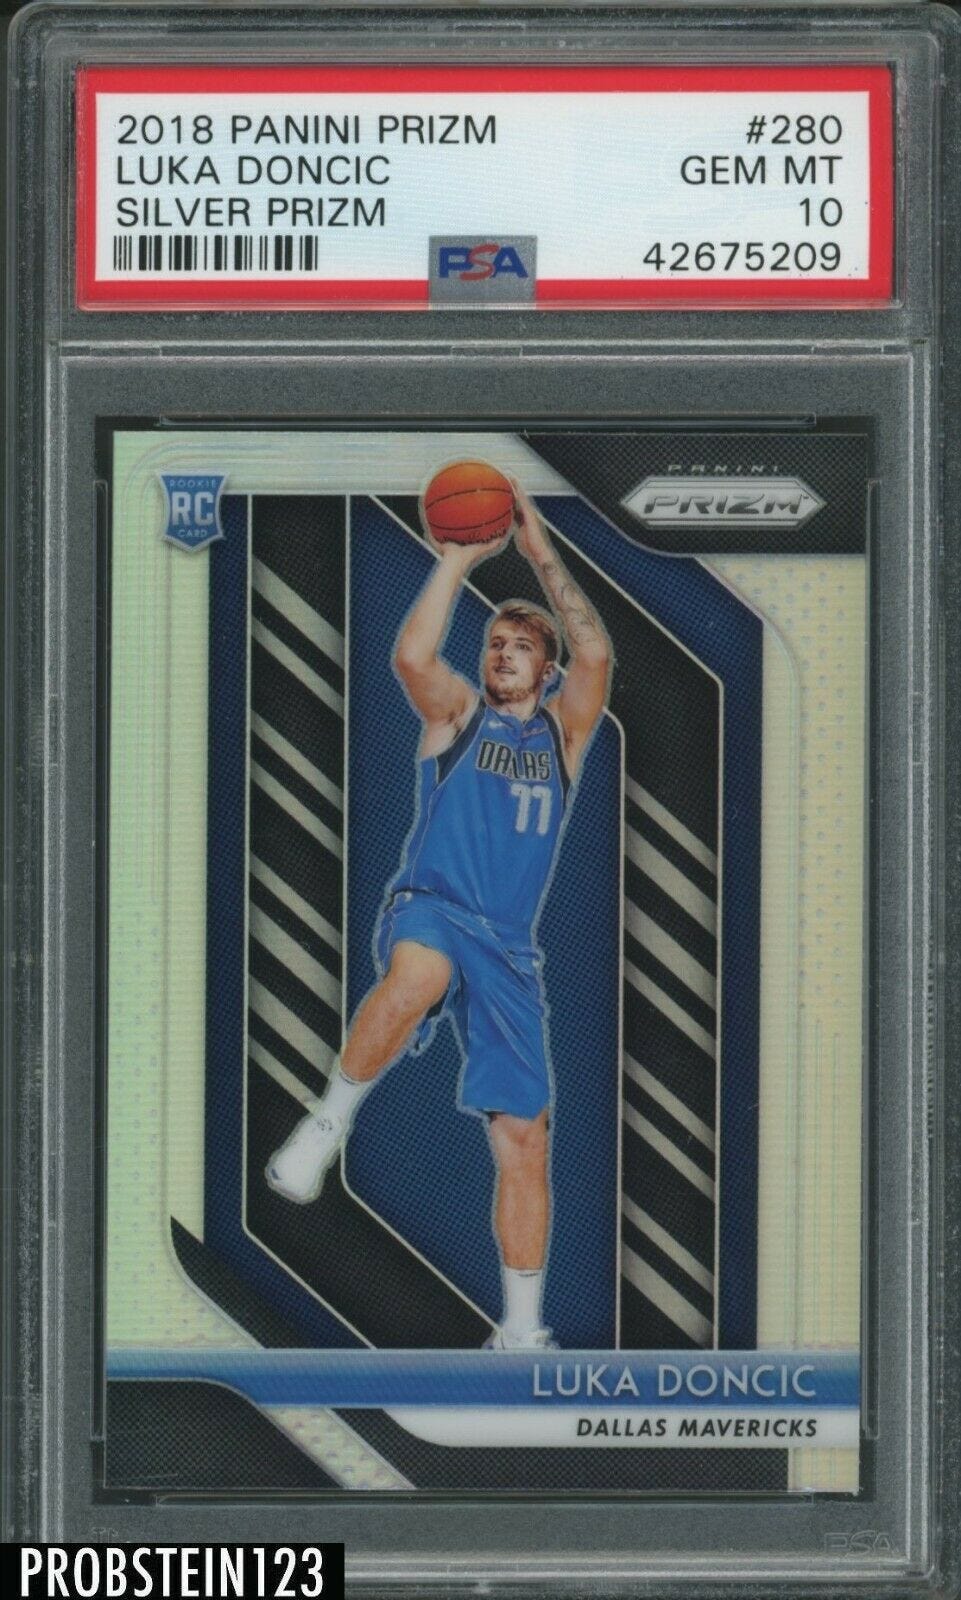 Image 1 - 2018-19 Panini Silver Prizm #280 Luka Doncic RC Rookie PSA 10 &amp;#034; SUPER HIGH END &amp;#034;